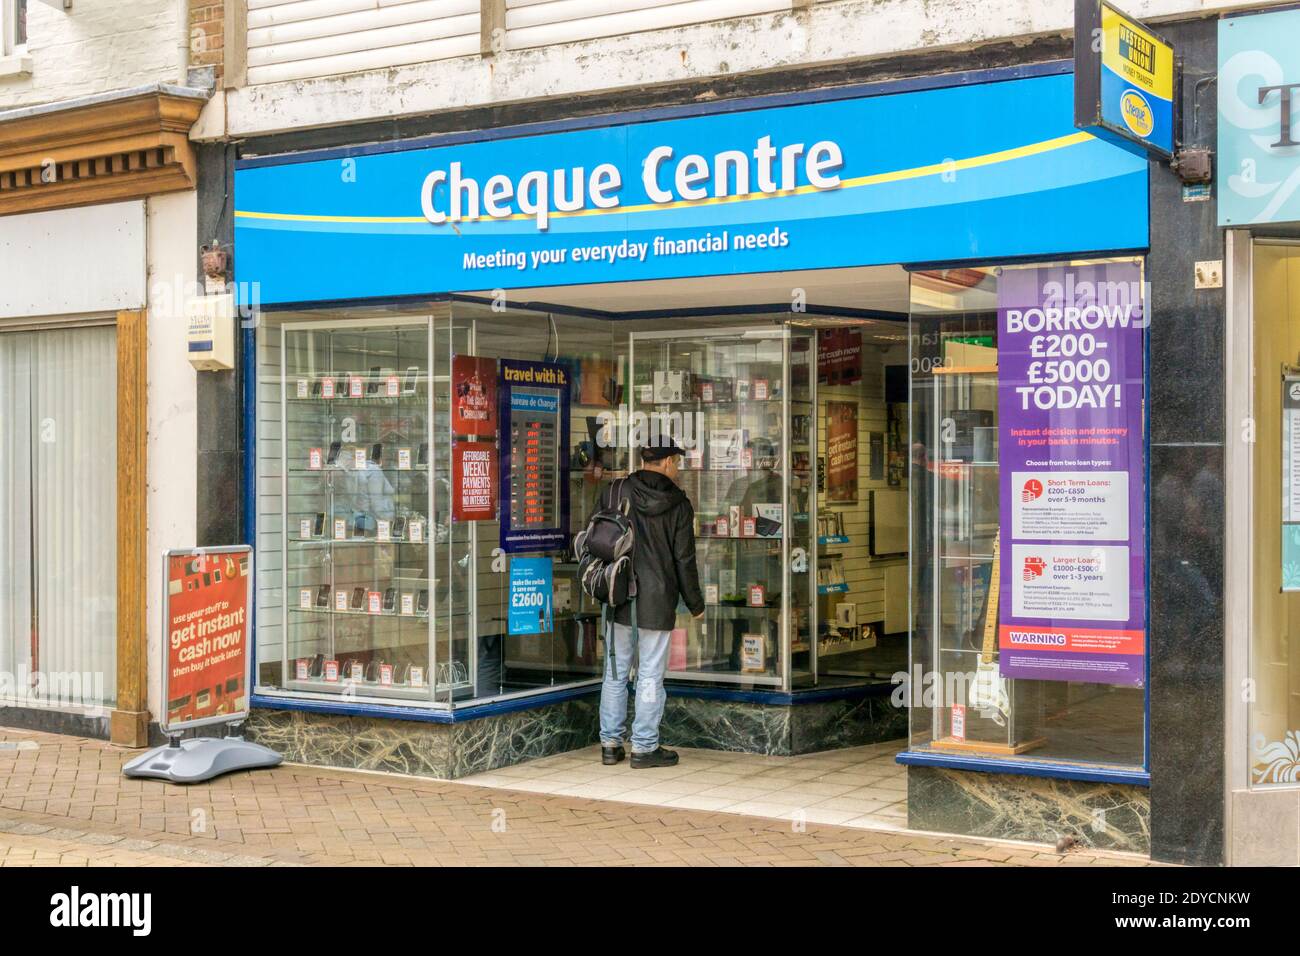 Premises of Cheque Centre loans company in High Street, King's Lynn. Stock Photo